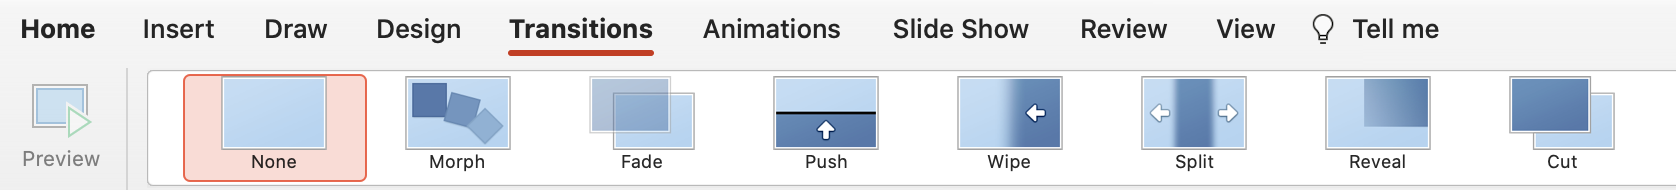 slide transition options in powerpoint